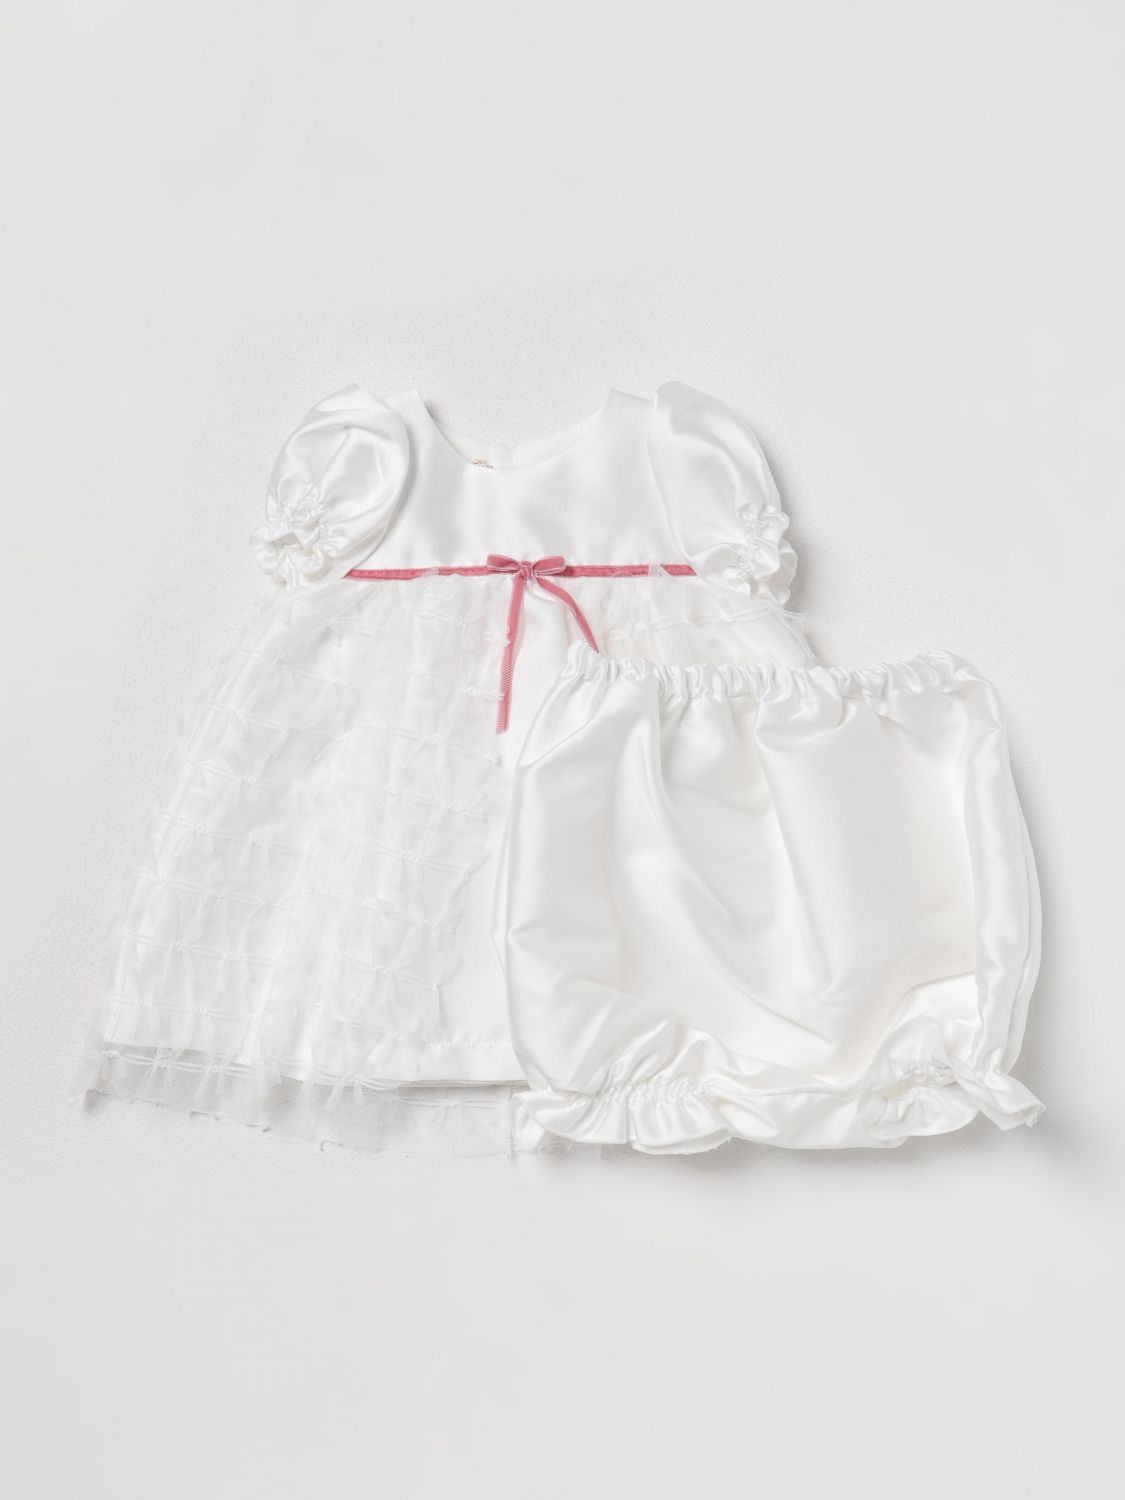 La Stupenderia Babies' Strampler  Kinder Farbe Weiss In White